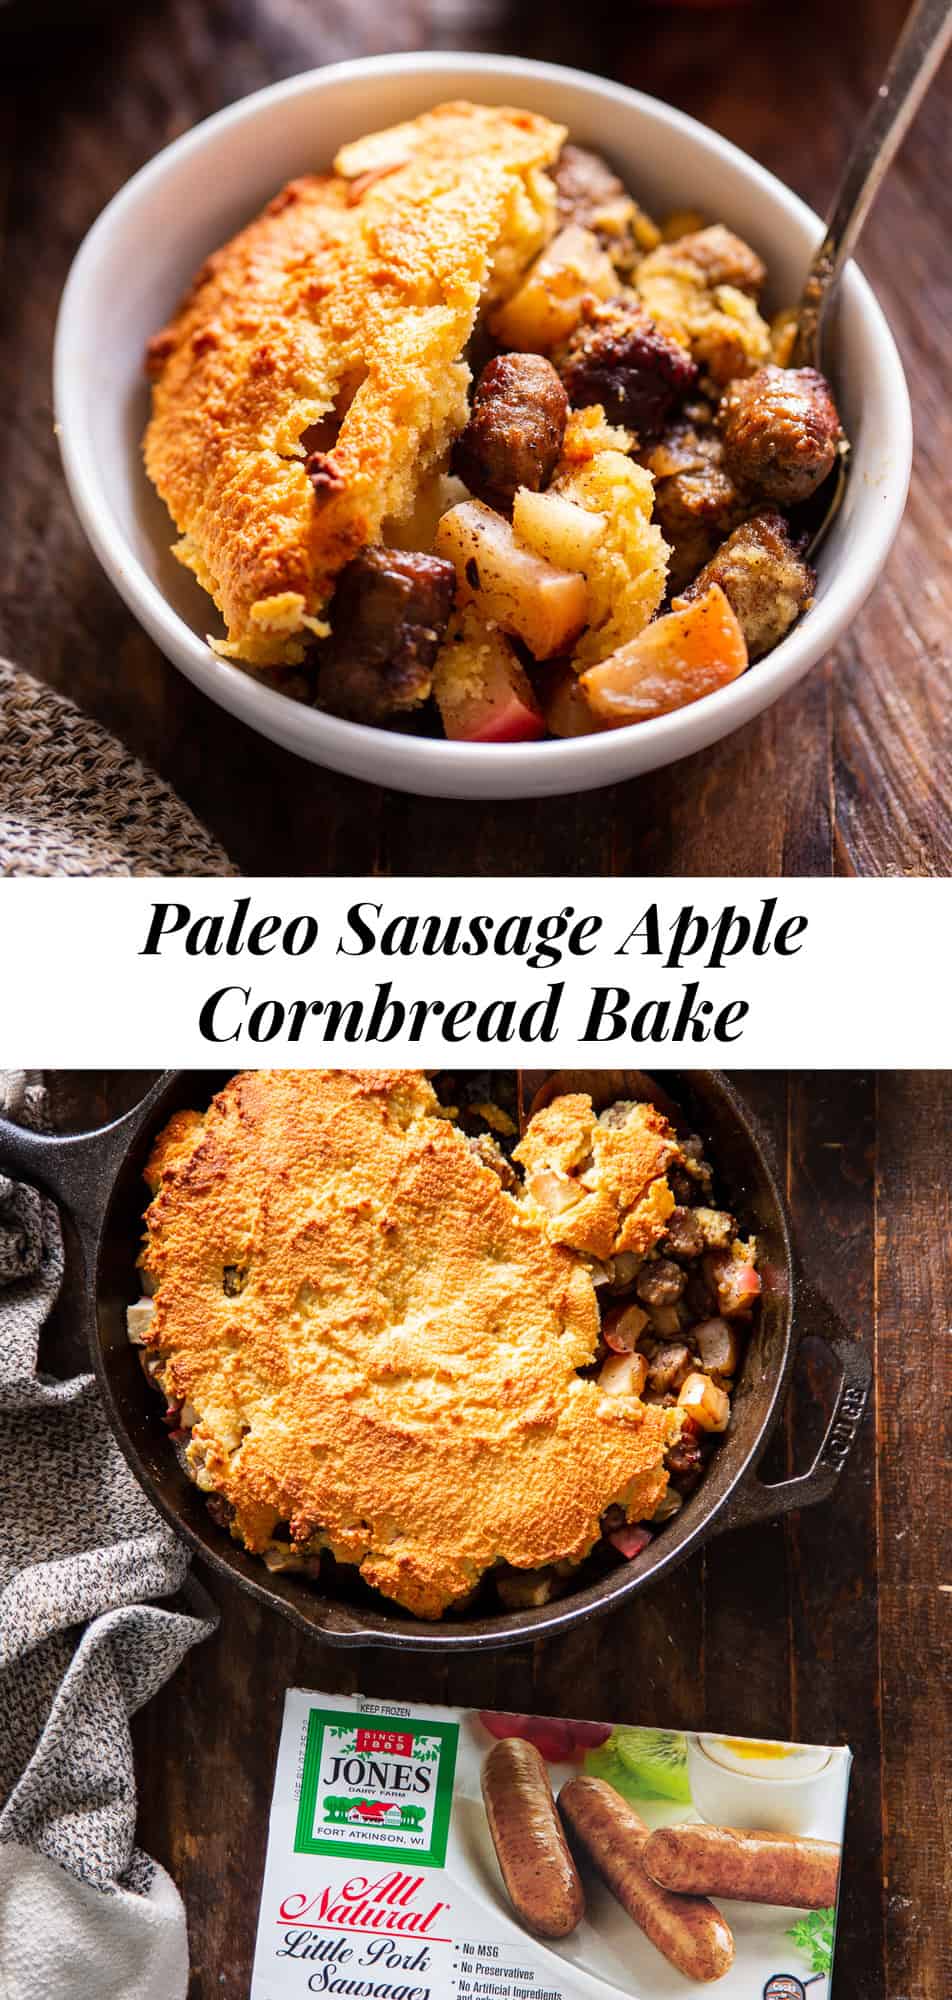 This grain free and paleo sausage apple cornbread skillet is packed with protein, savory, sweet and comforting. Have it for breakfast, brunch or dinner. Gluten free and dairy free. #paleo #cleaneating #ad #jonesdairyfarm